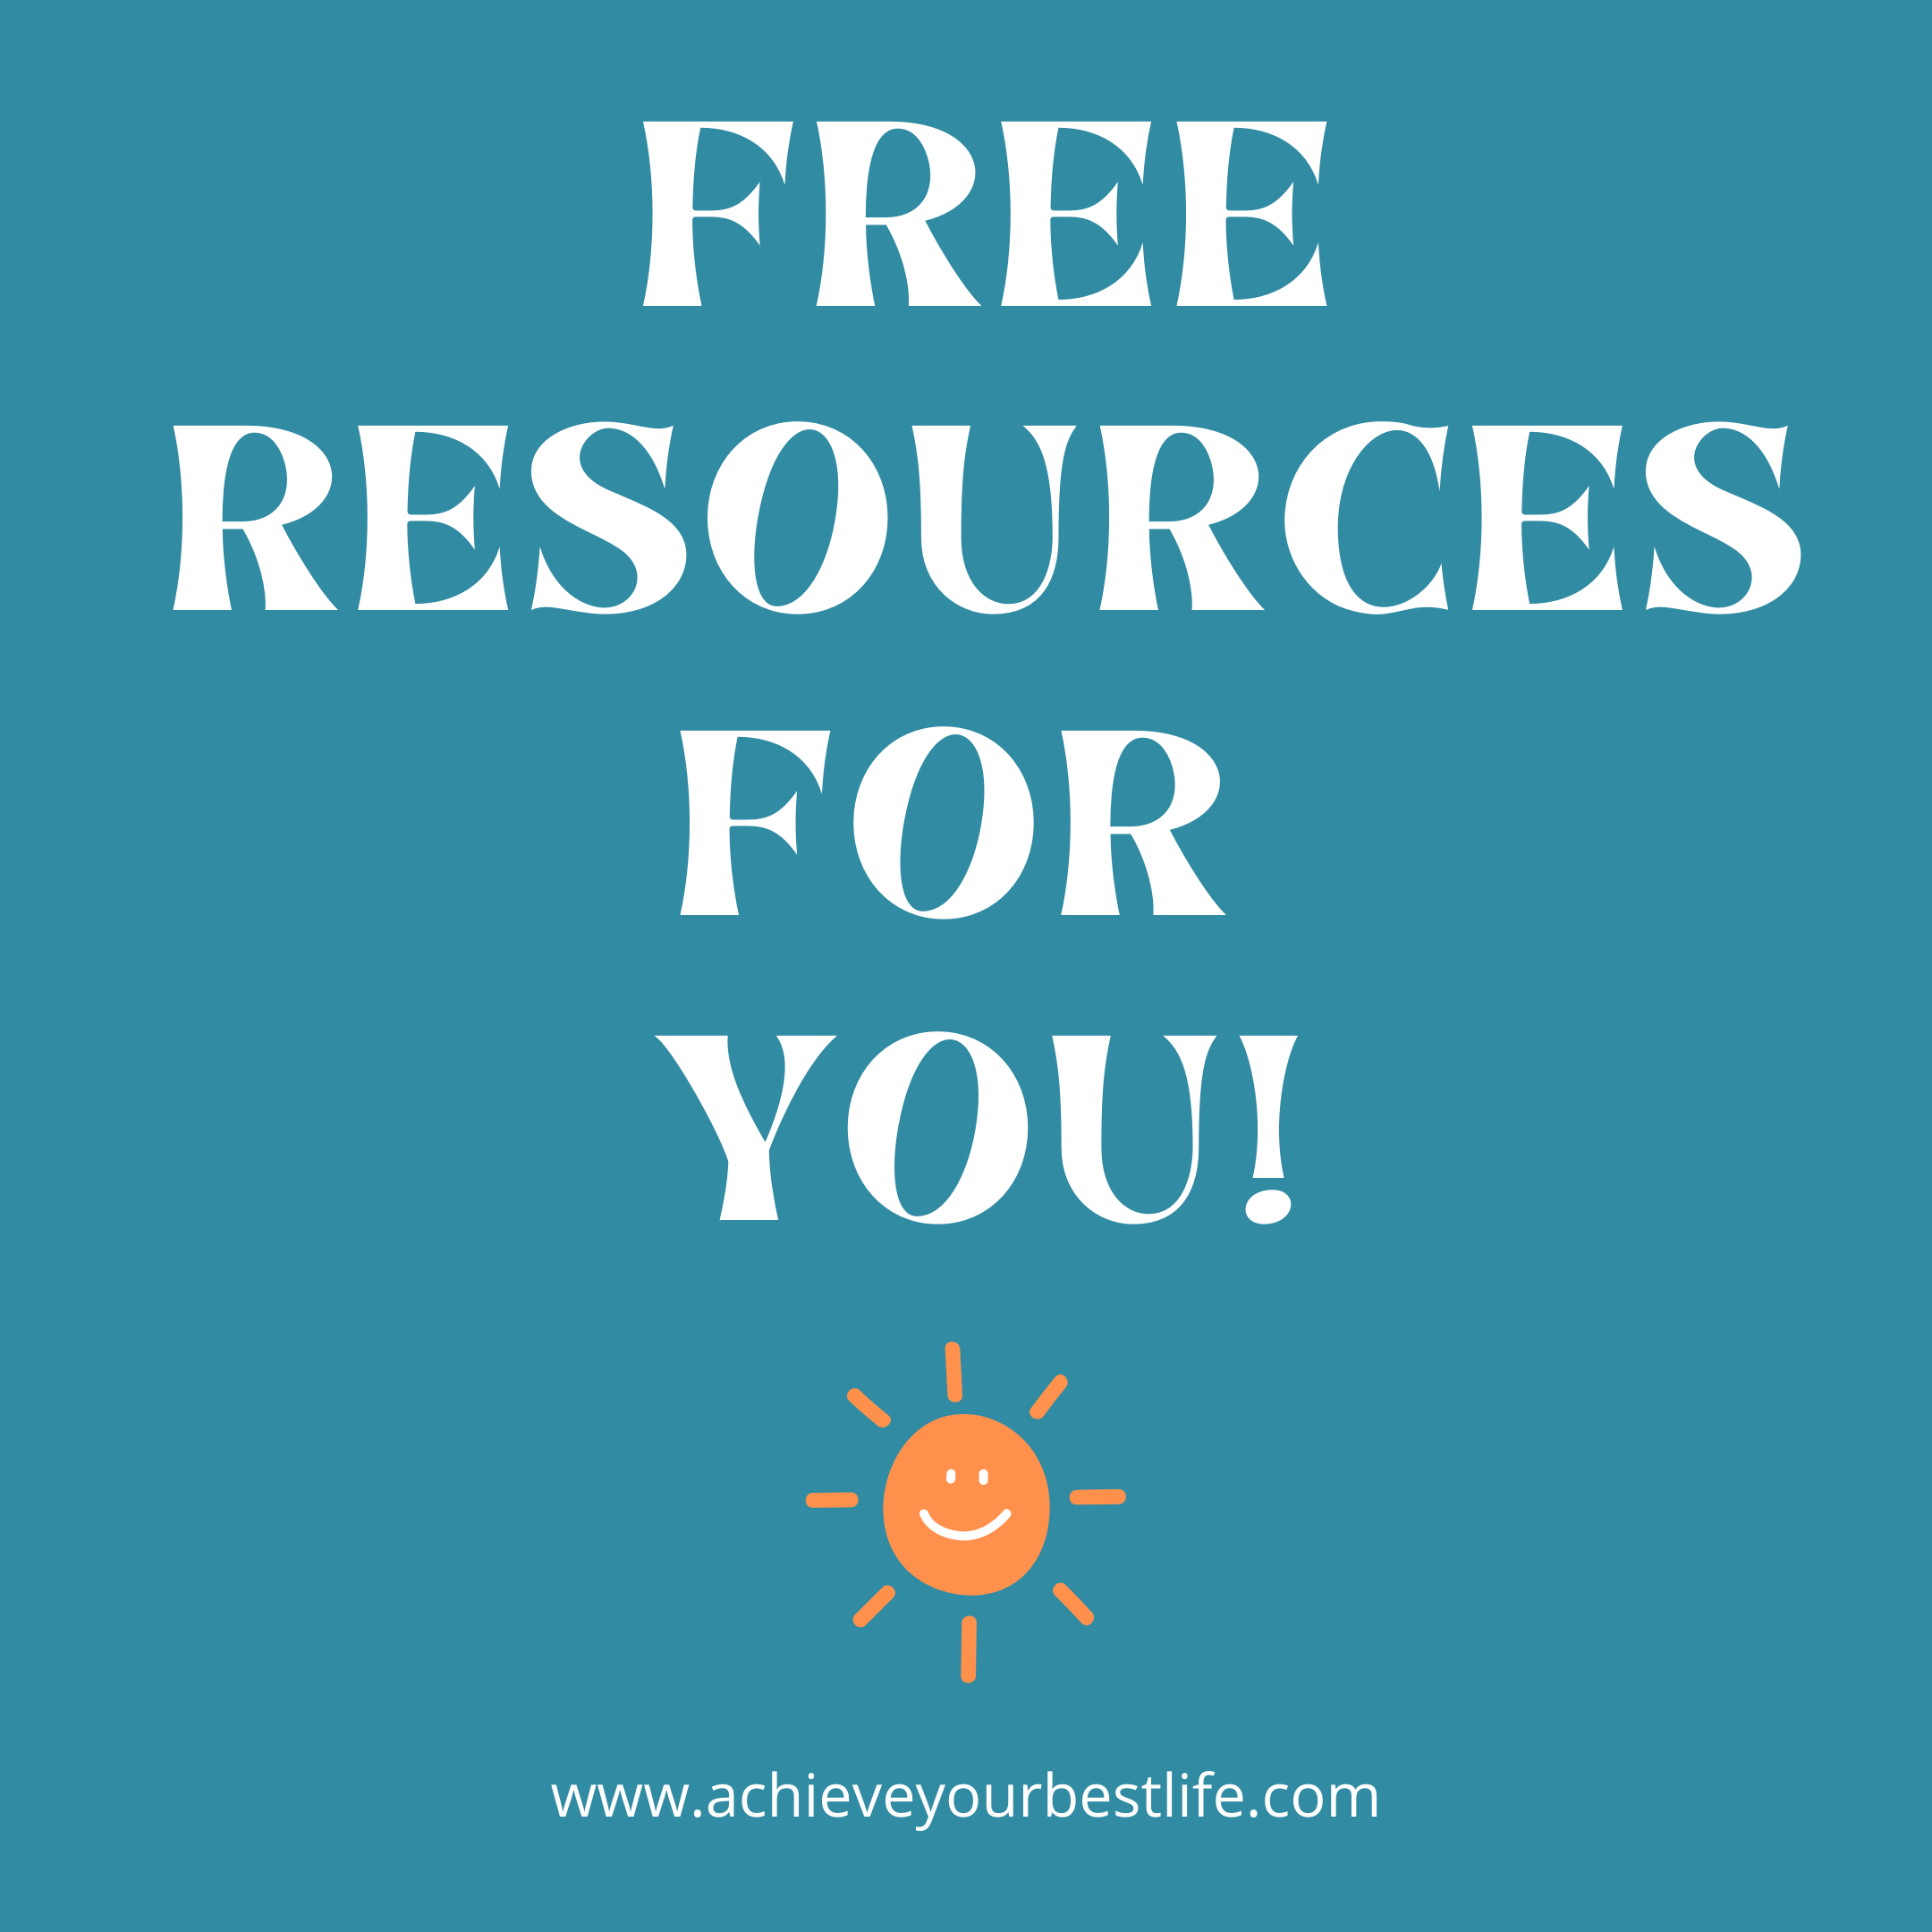 Free Resources For You!